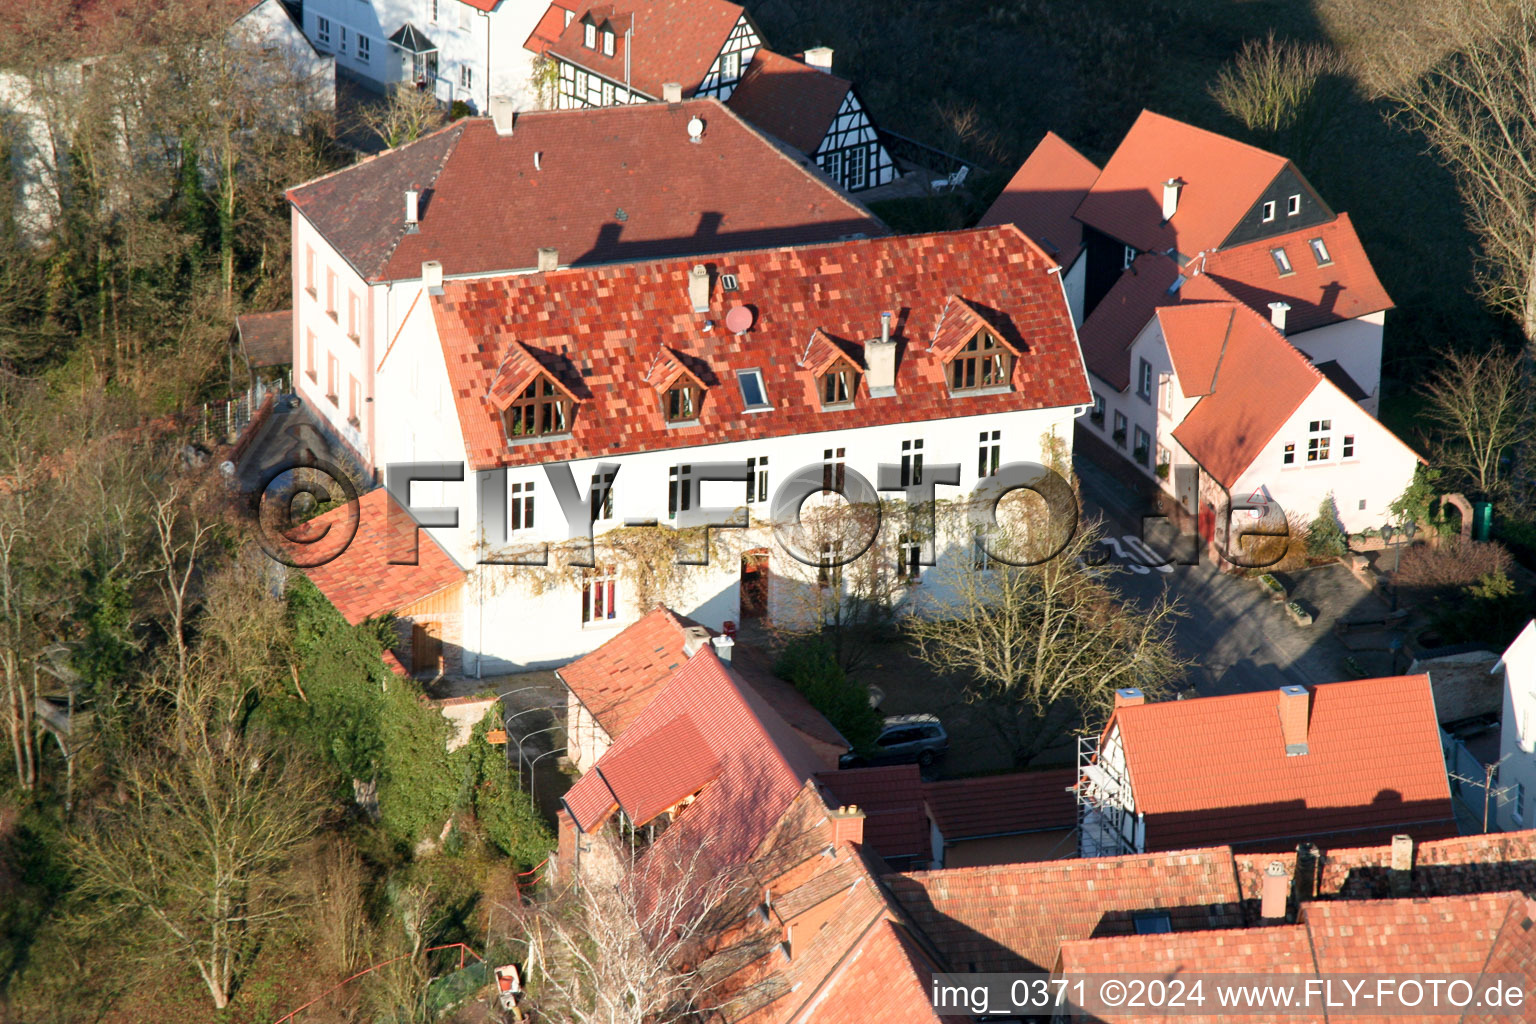 Ludwigstr in Jockgrim in the state Rhineland-Palatinate, Germany out of the air